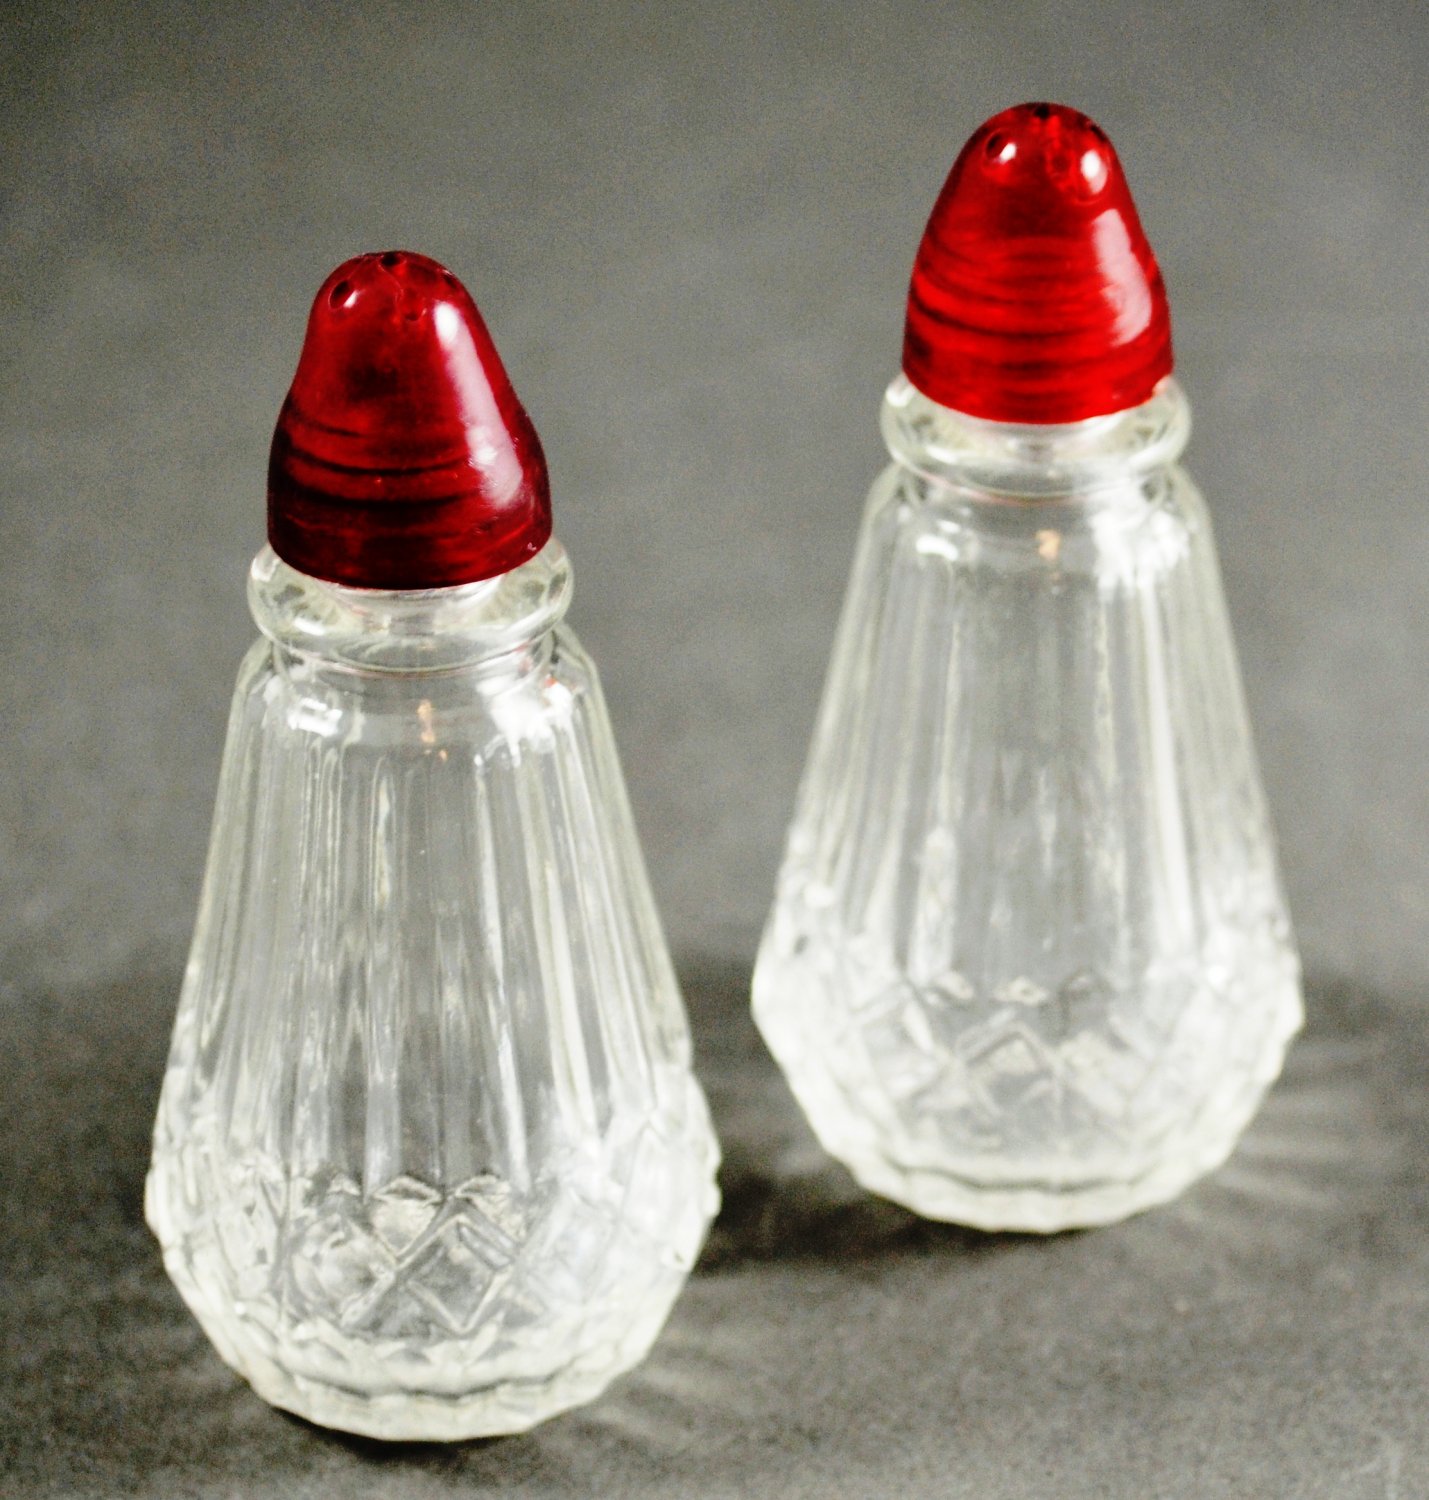 Vintage Clear Glass Salt And Pepper Shakers W Red Plastic Caps